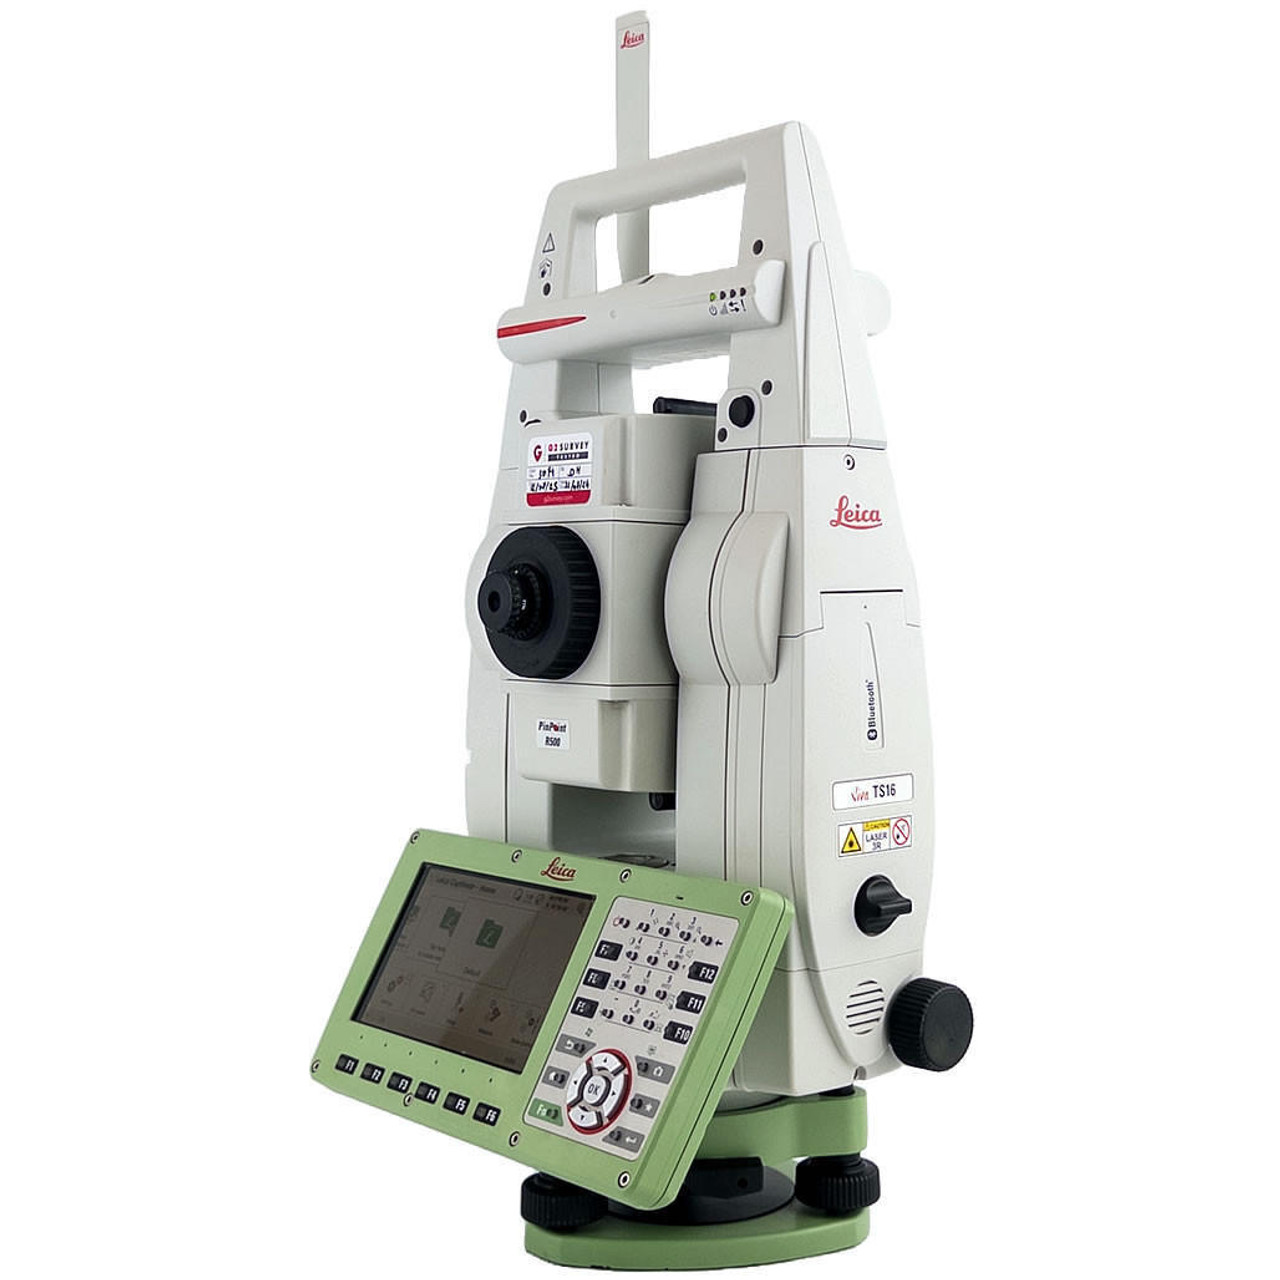 Leica TS16 5" R500 Robotic Total Station - Used